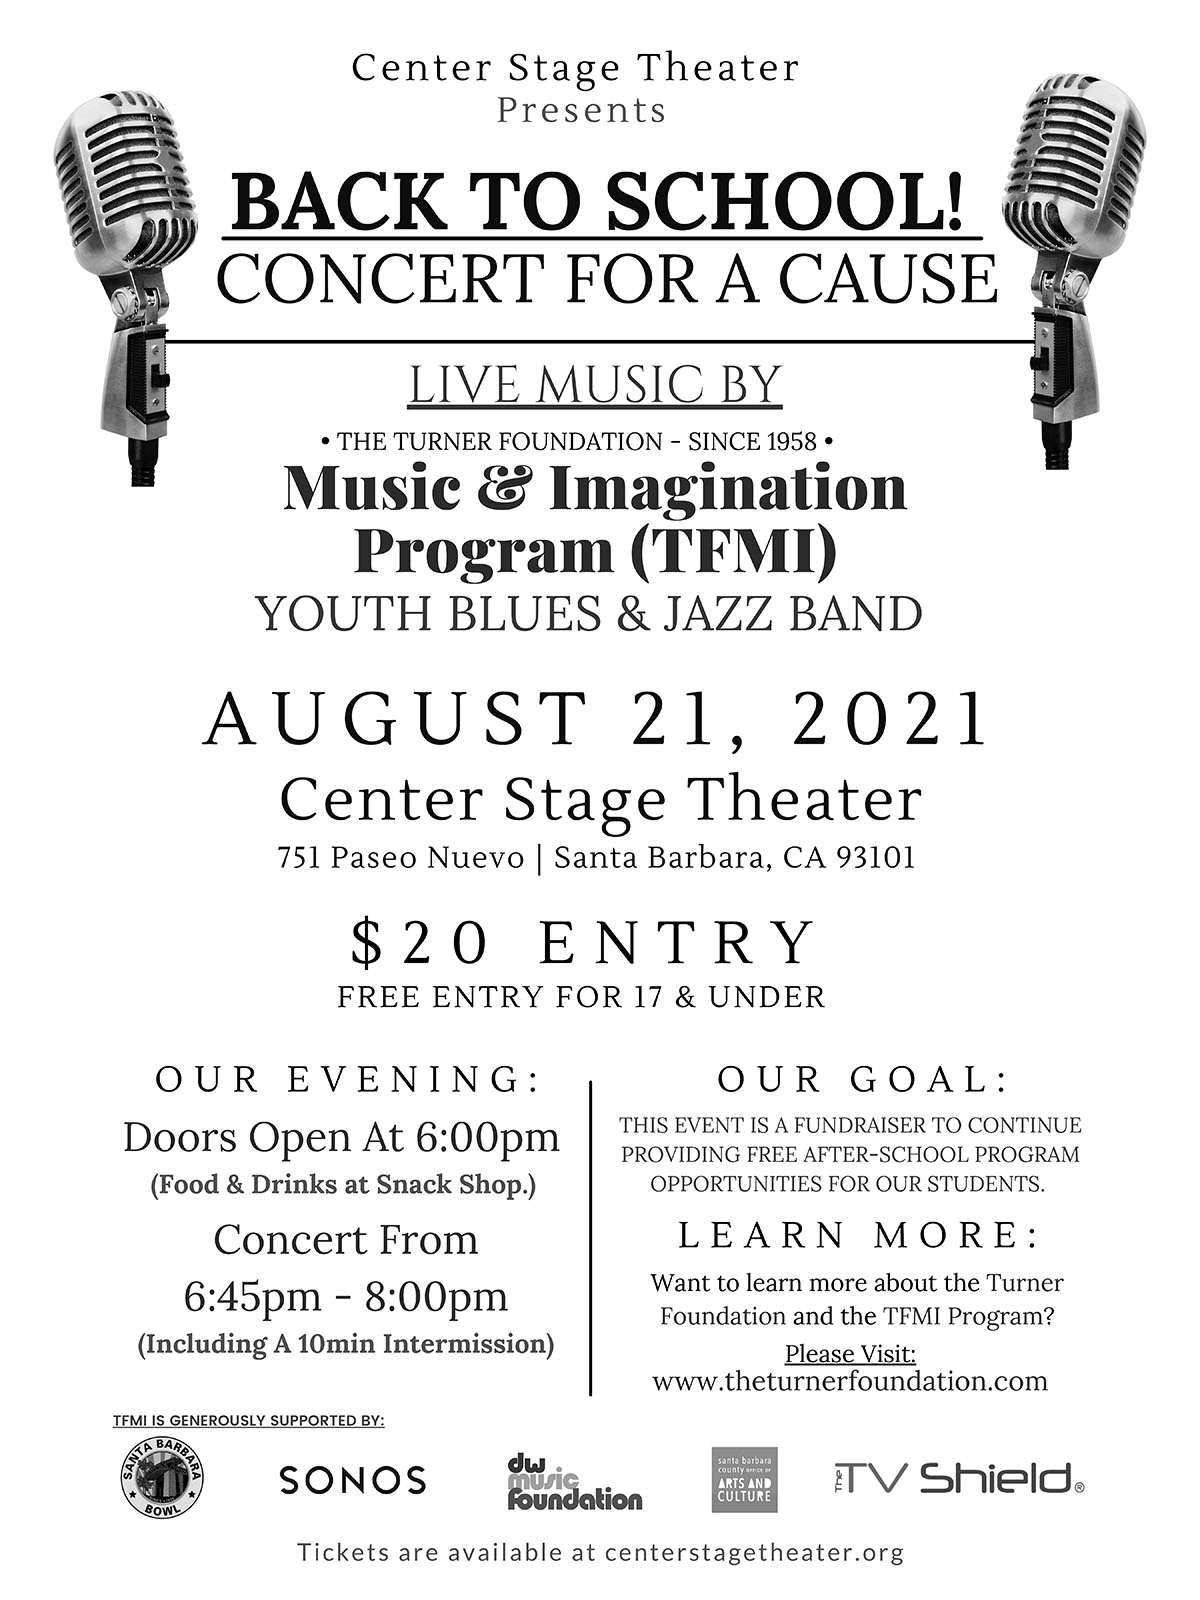 Back to School Concert for a Cause